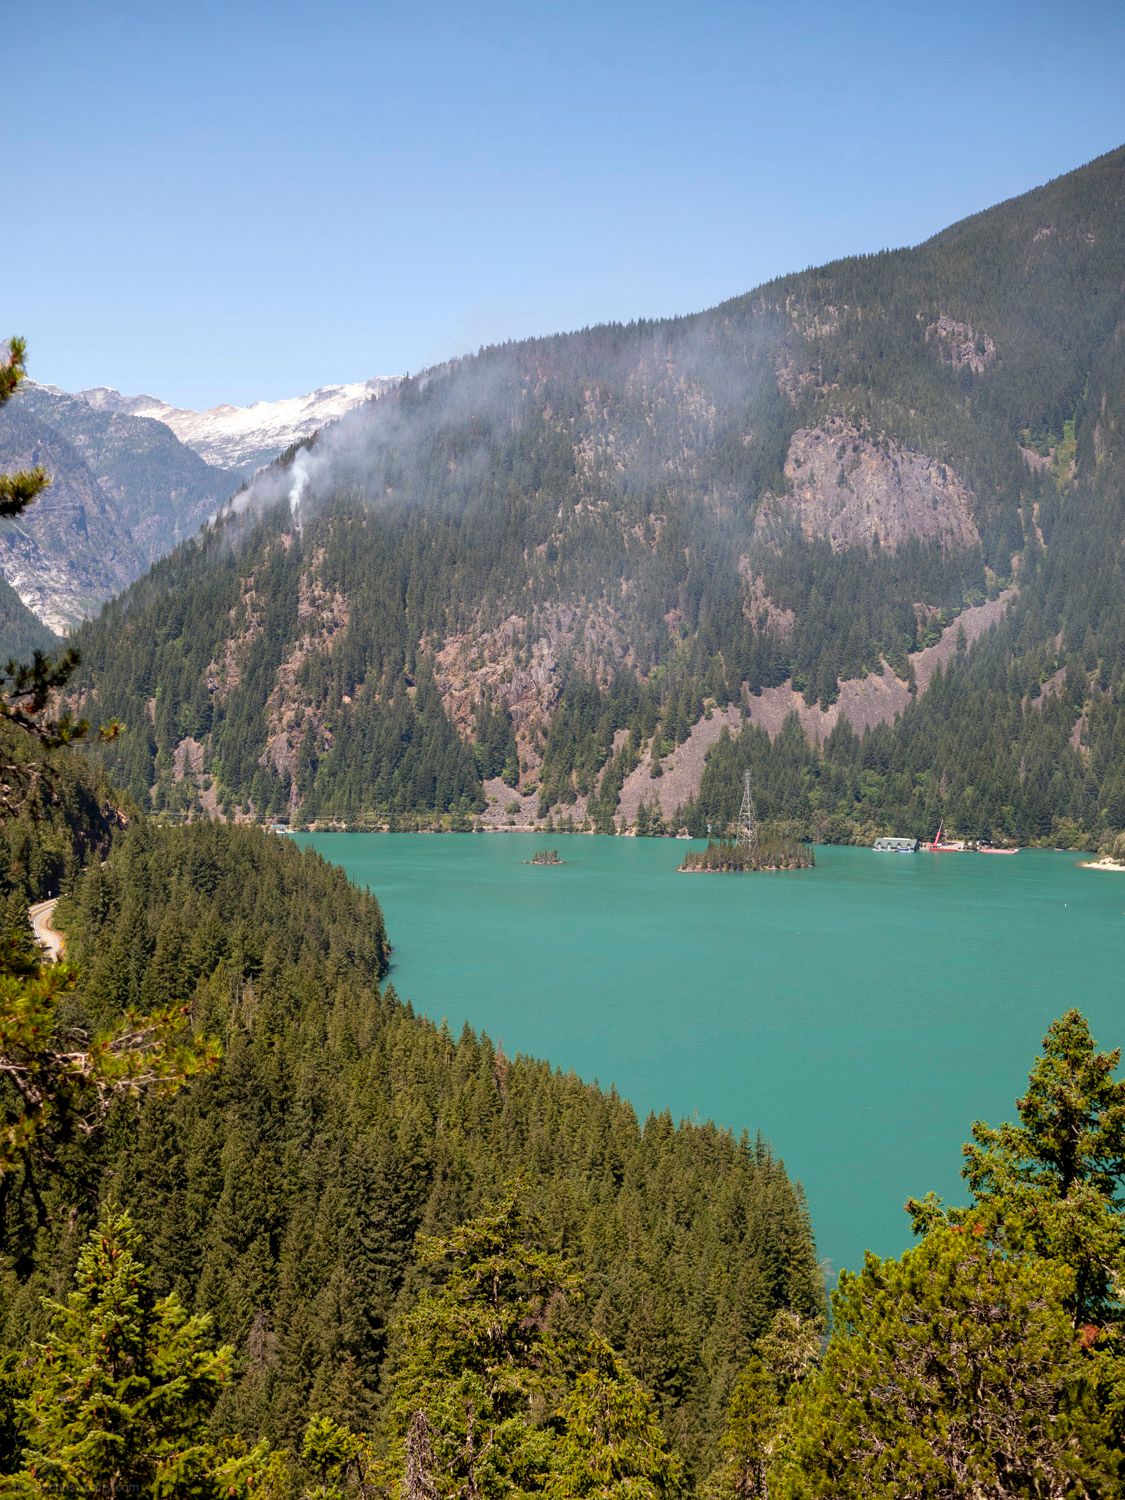 Landscape of a bright blue lake, with white smoke coming from the mountain in the center